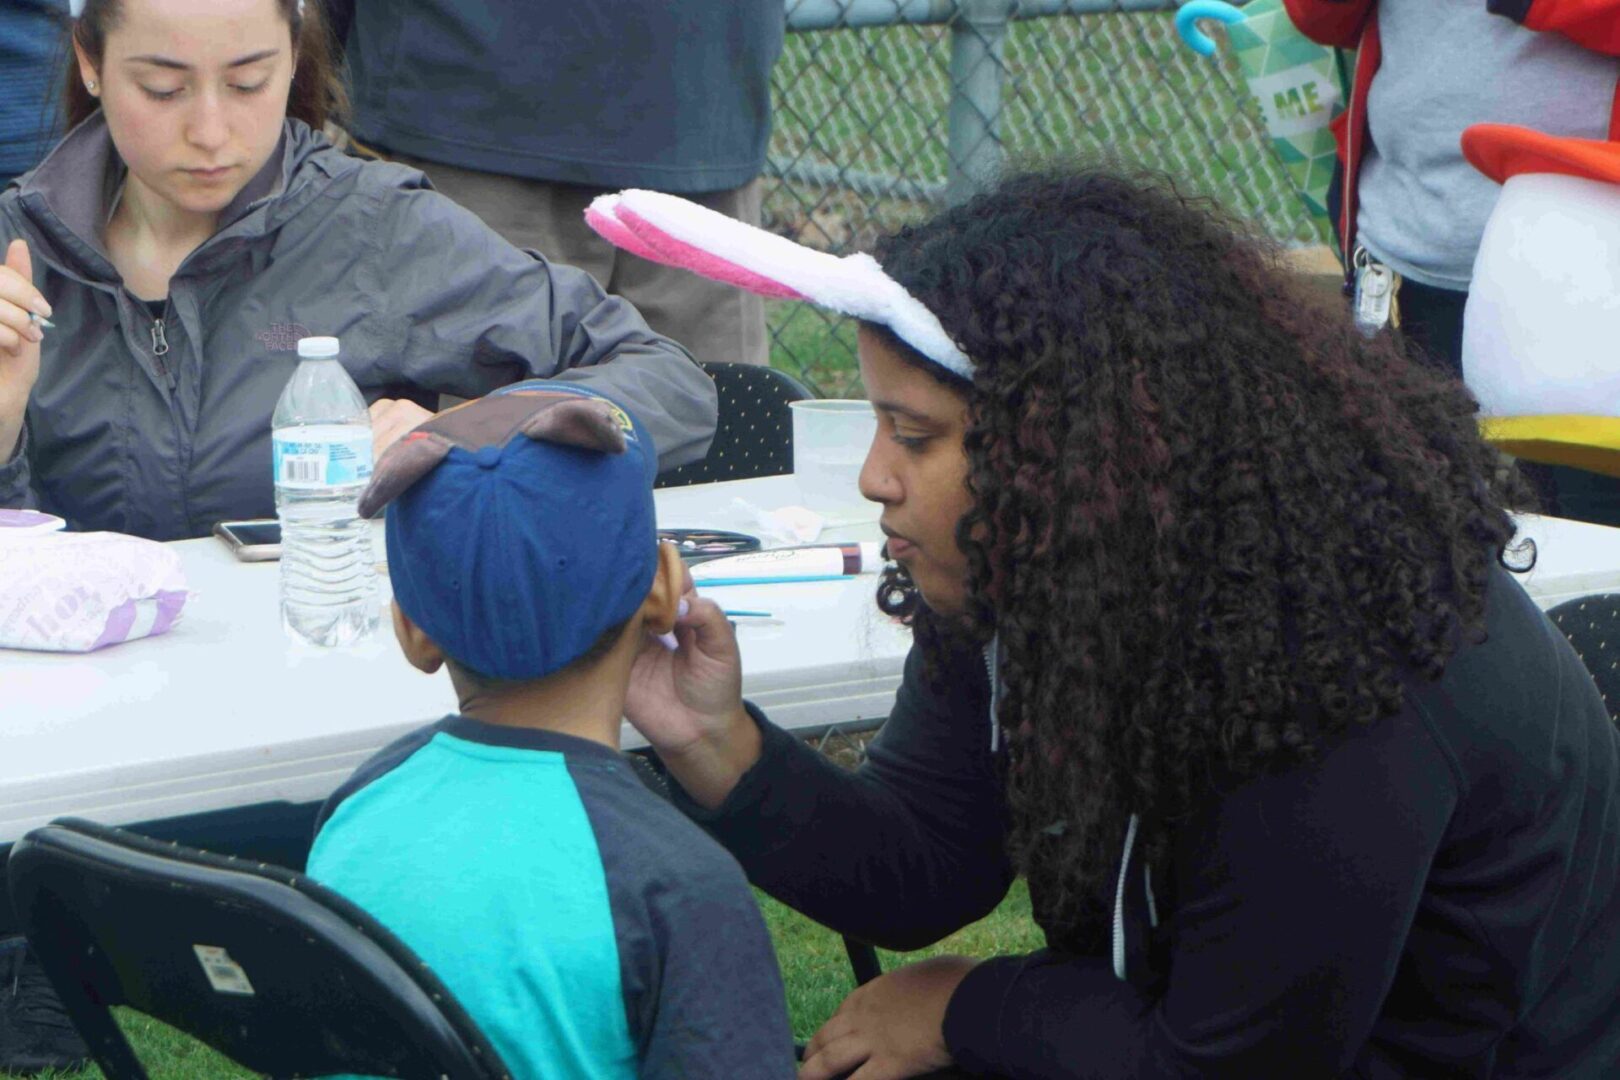 A woman in bunny ears face painting a boy with a cap, different angle